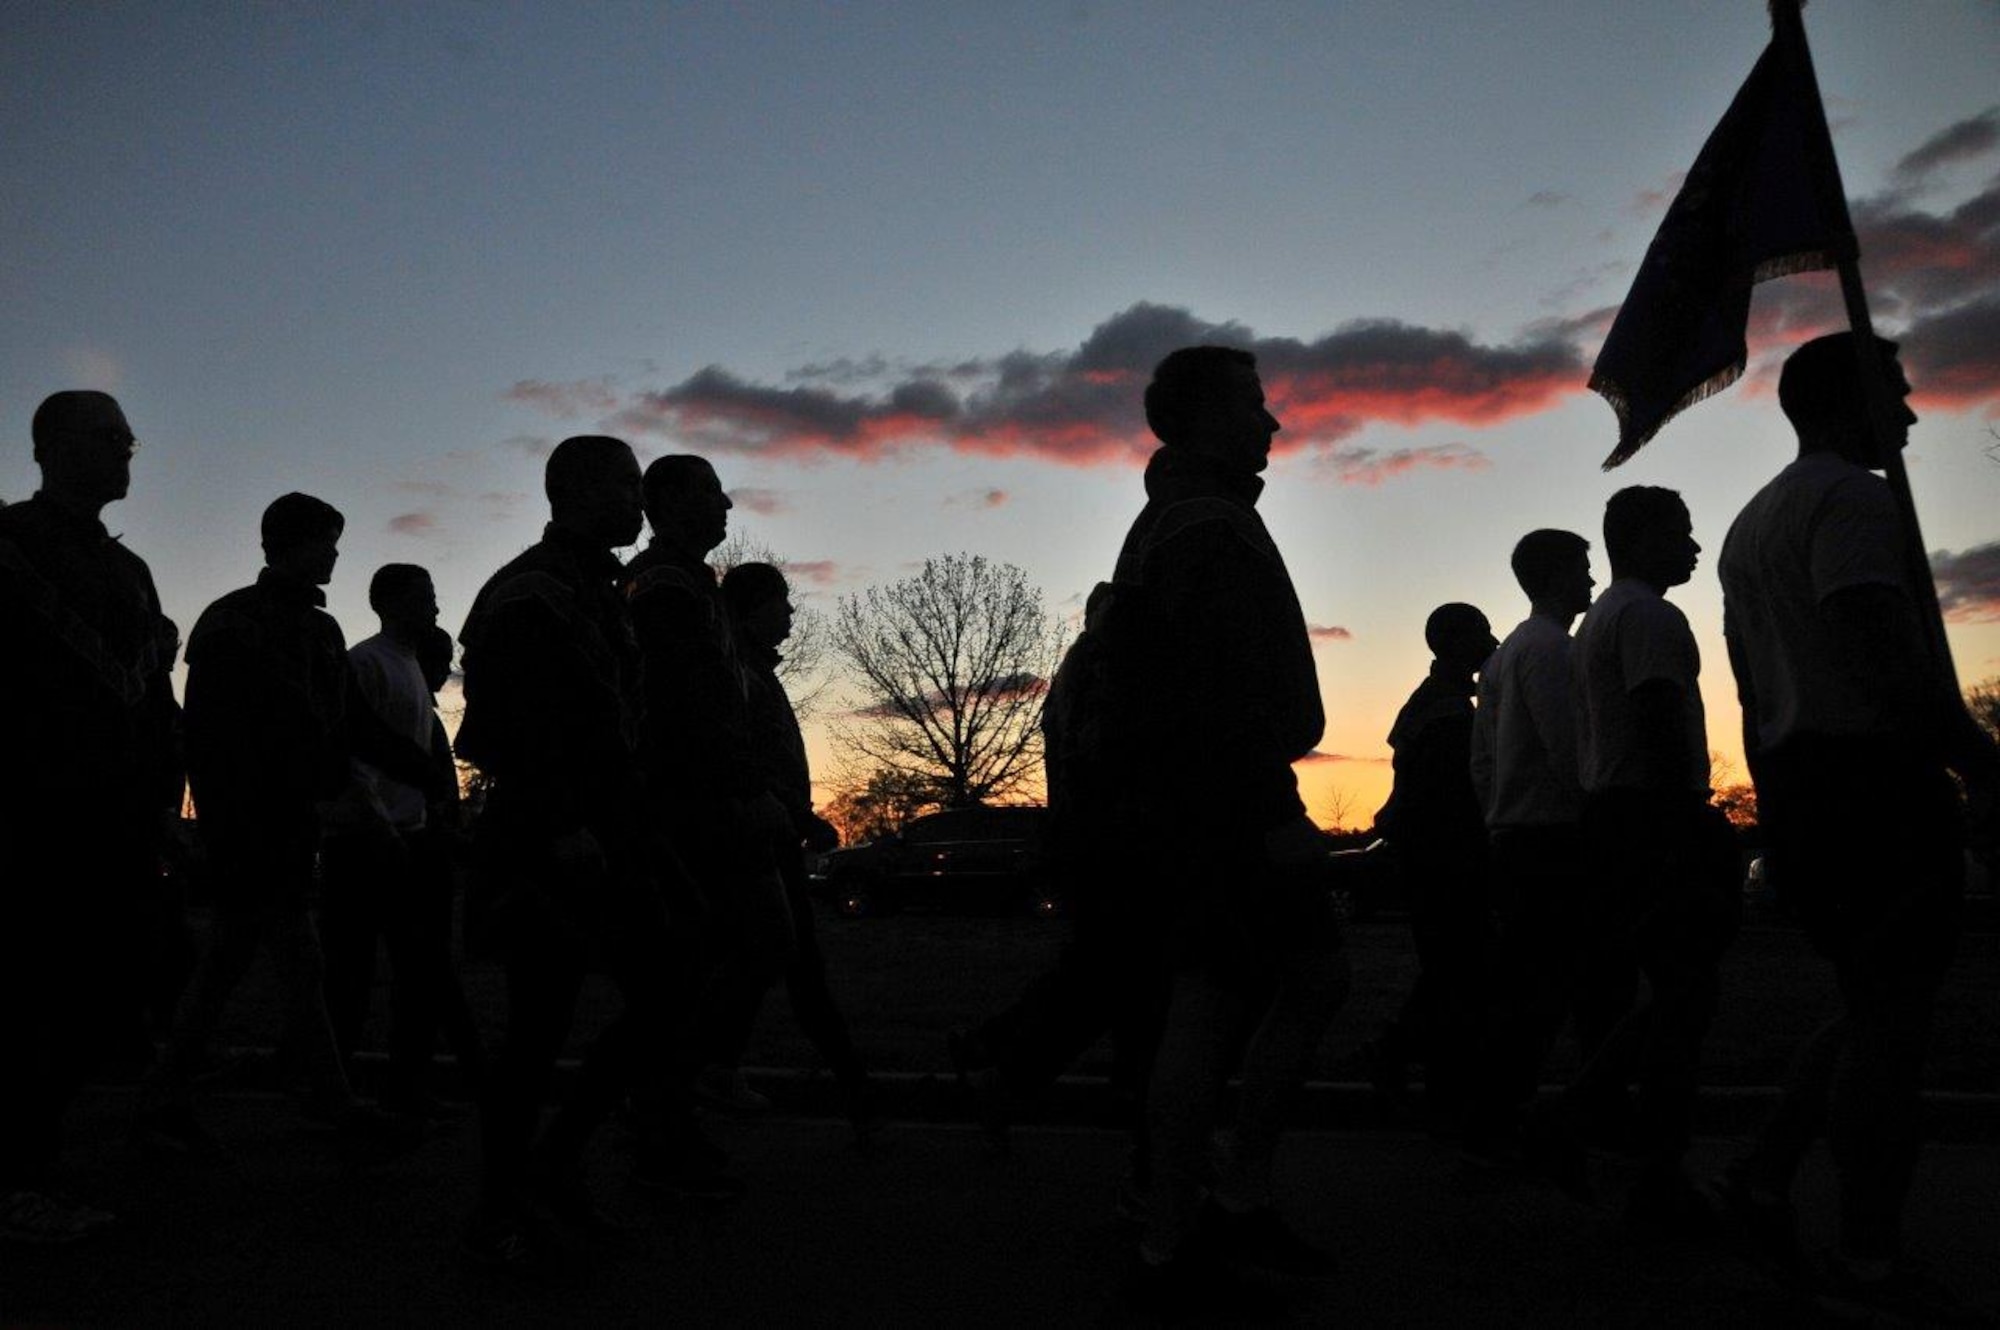 Airmen assigned to the 70th Intelligence, Surveillance and Reconnaissance Wing march in formation to the starting line as part of the 2016 Sexual Assault, Awareness and Prevention Month garrison run April 8, 2016 at Fort George G. Meade, Md. There were over 1,900 joint service members participating in the SAAPM event. (U.S. Air Force photo/Staff Sgt. Alexandre Montes)